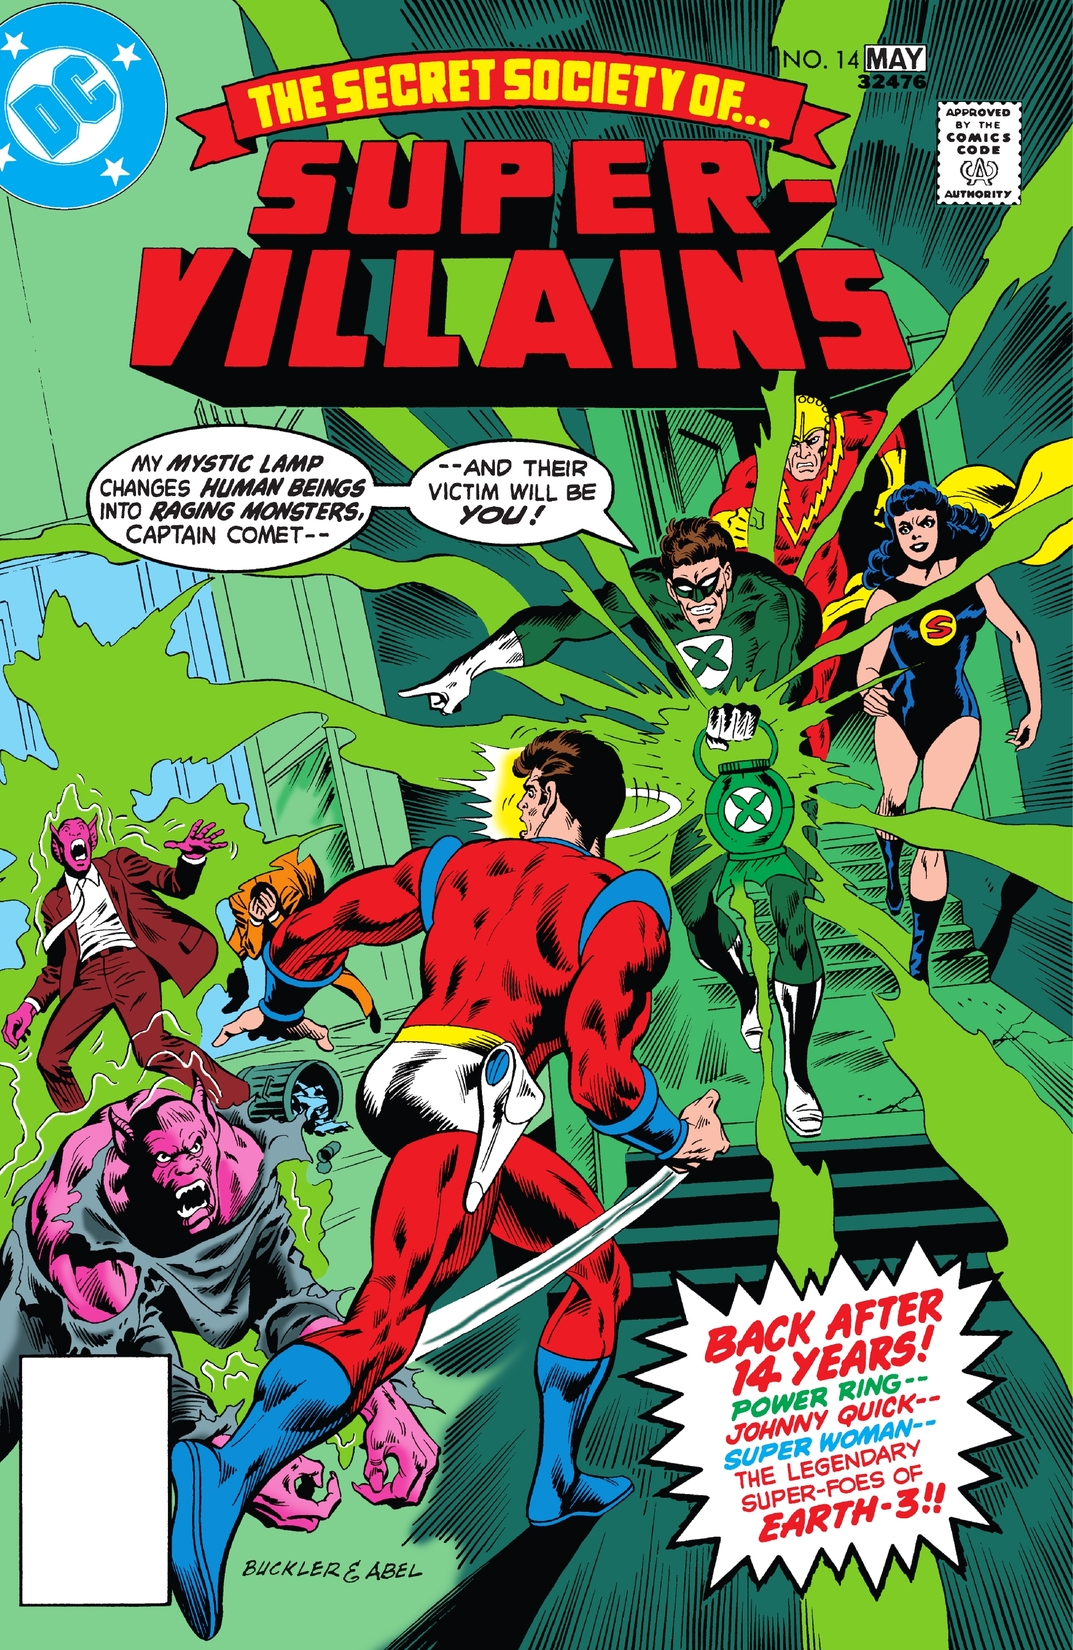 The Secret Society of Super-Villains #14 preview images